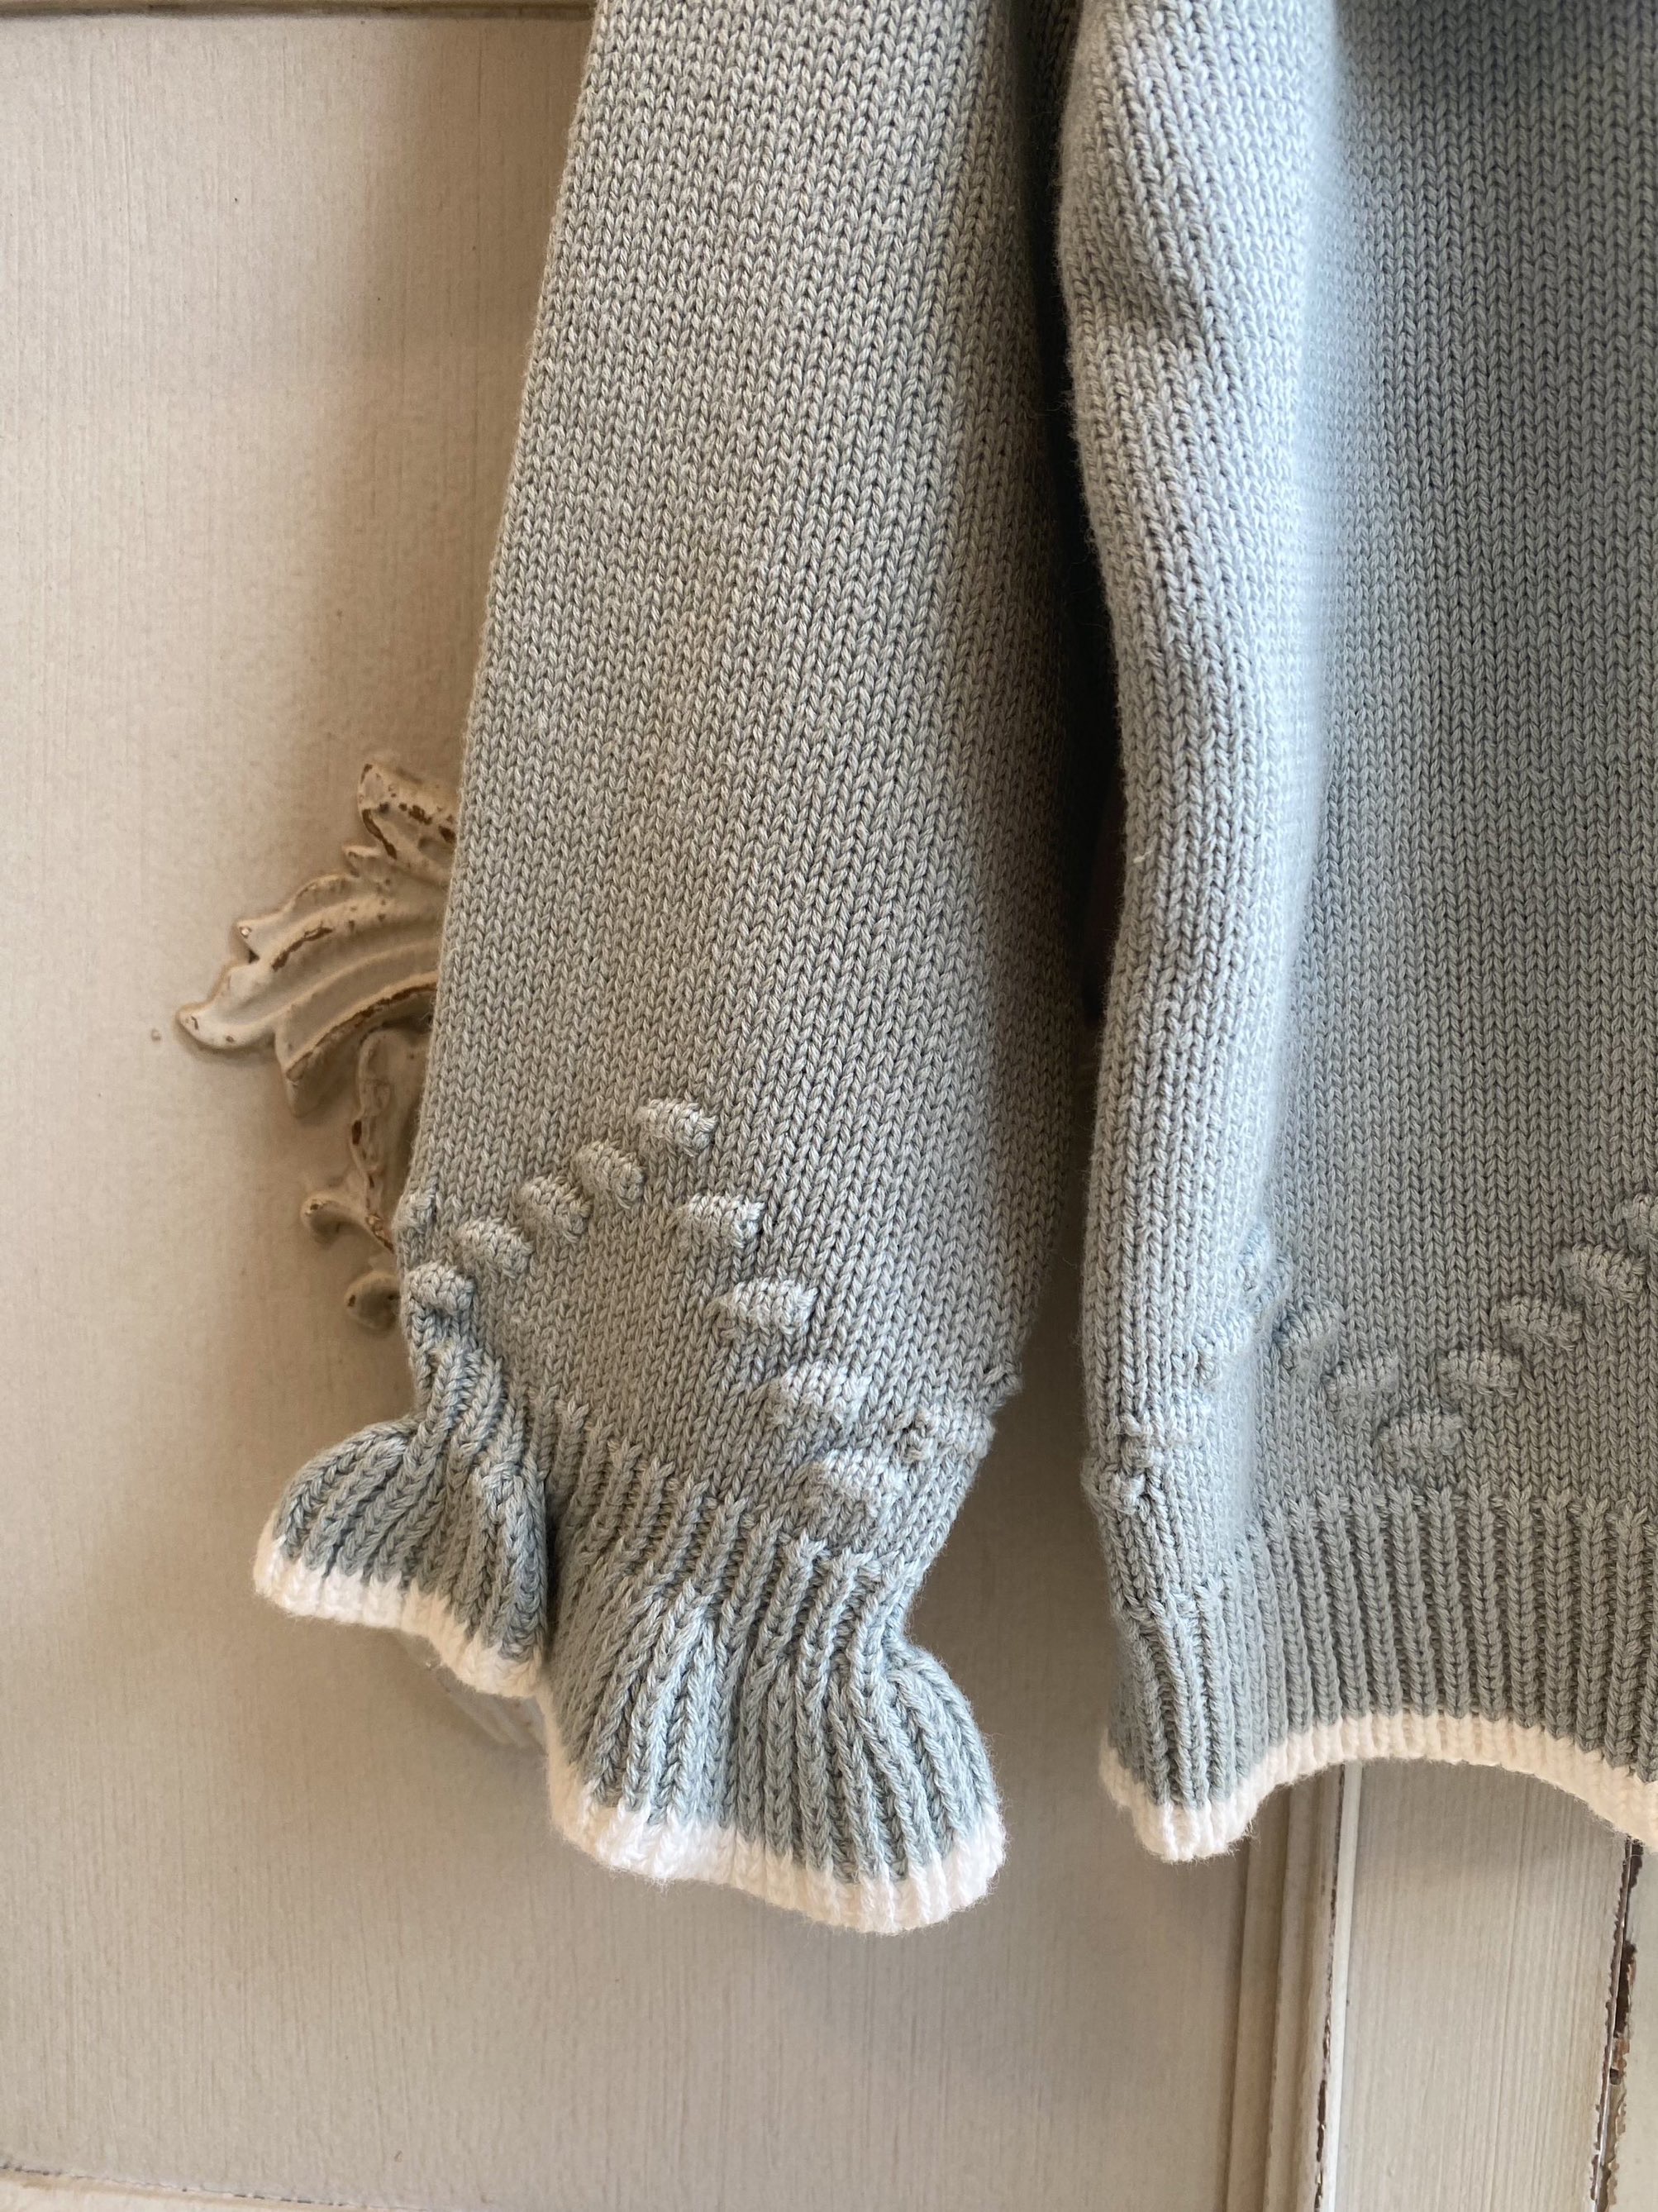 Close up of a girls knitwear jumper. Picture shows the stitching detail of the cotton and also the frilly cuff.